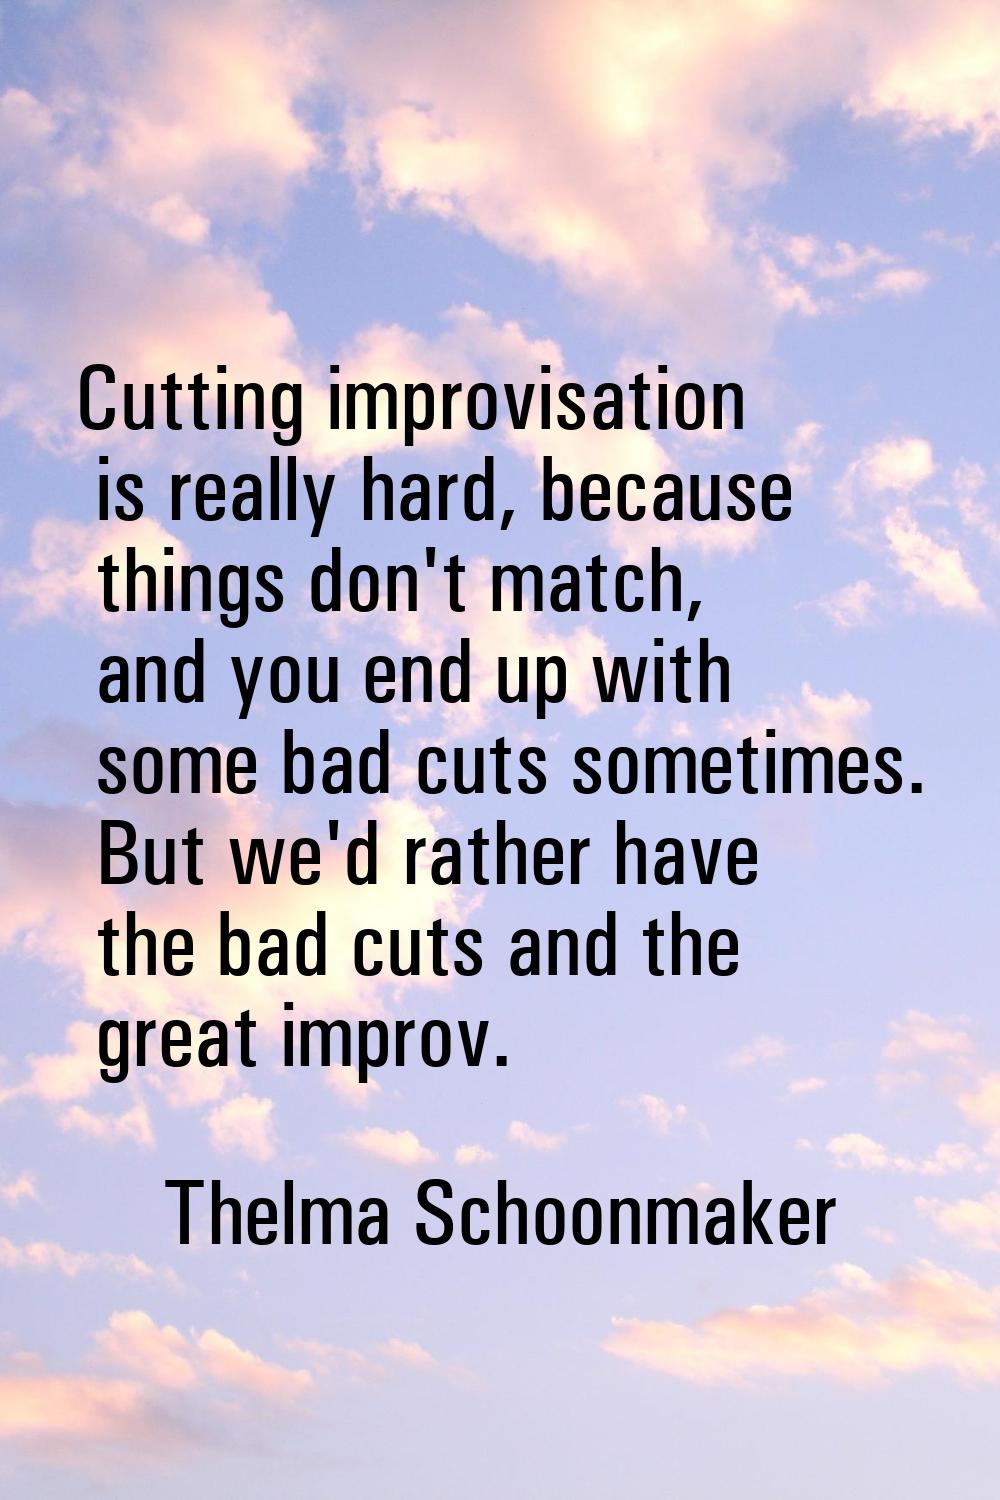 Cutting improvisation is really hard, because things don't match, and you end up with some bad cuts